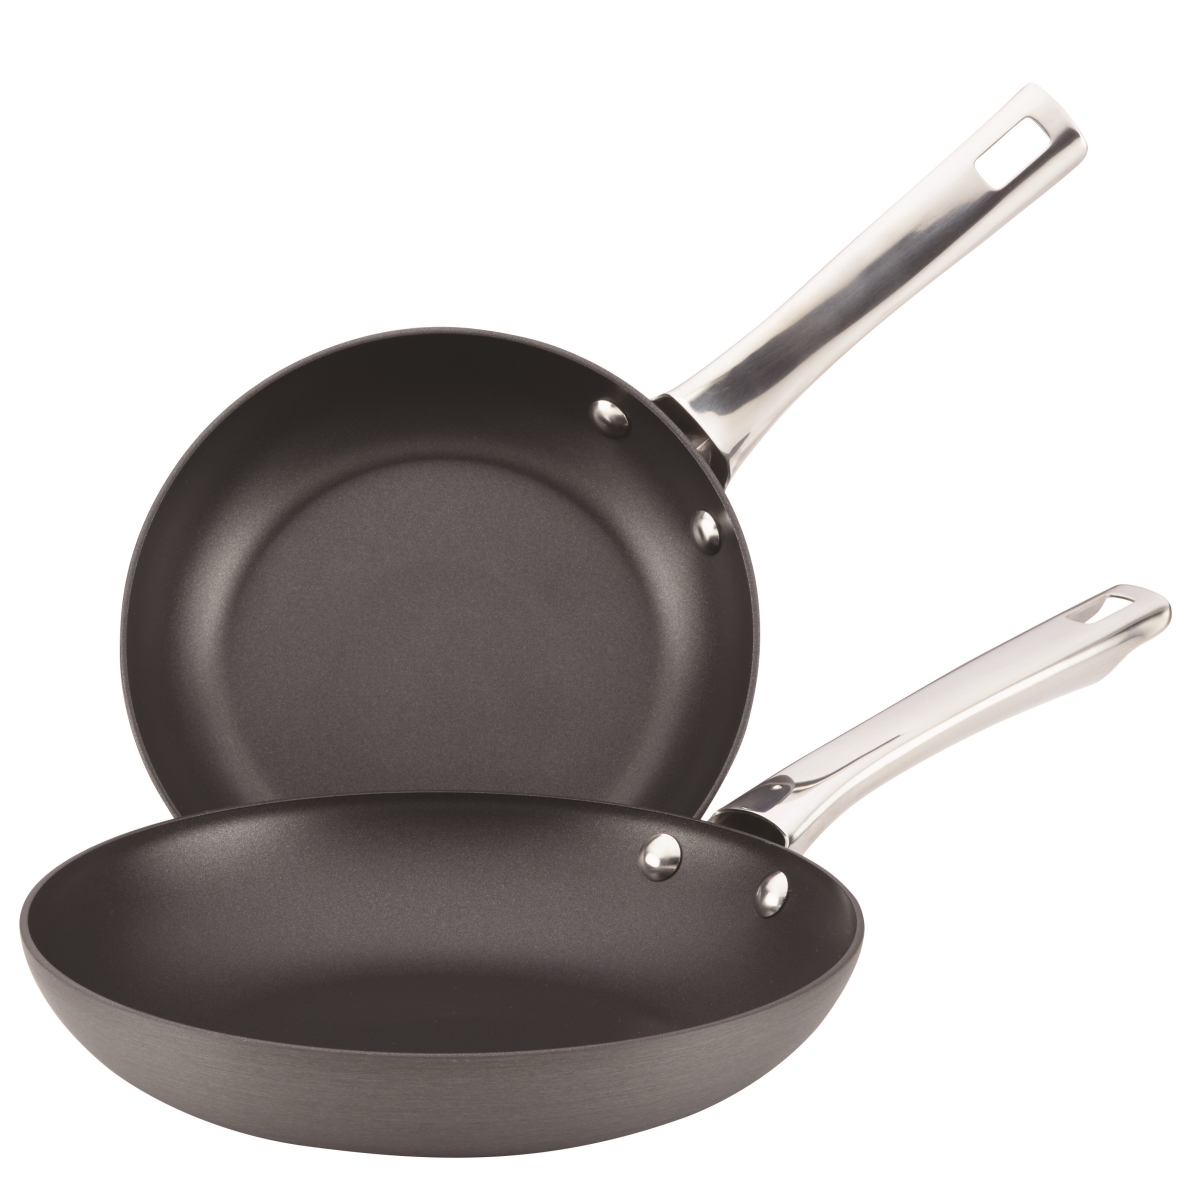 84515 Hard-anodized Nonstick Skillet Set, 8 & 10 In. - Gray - Pack Of 2